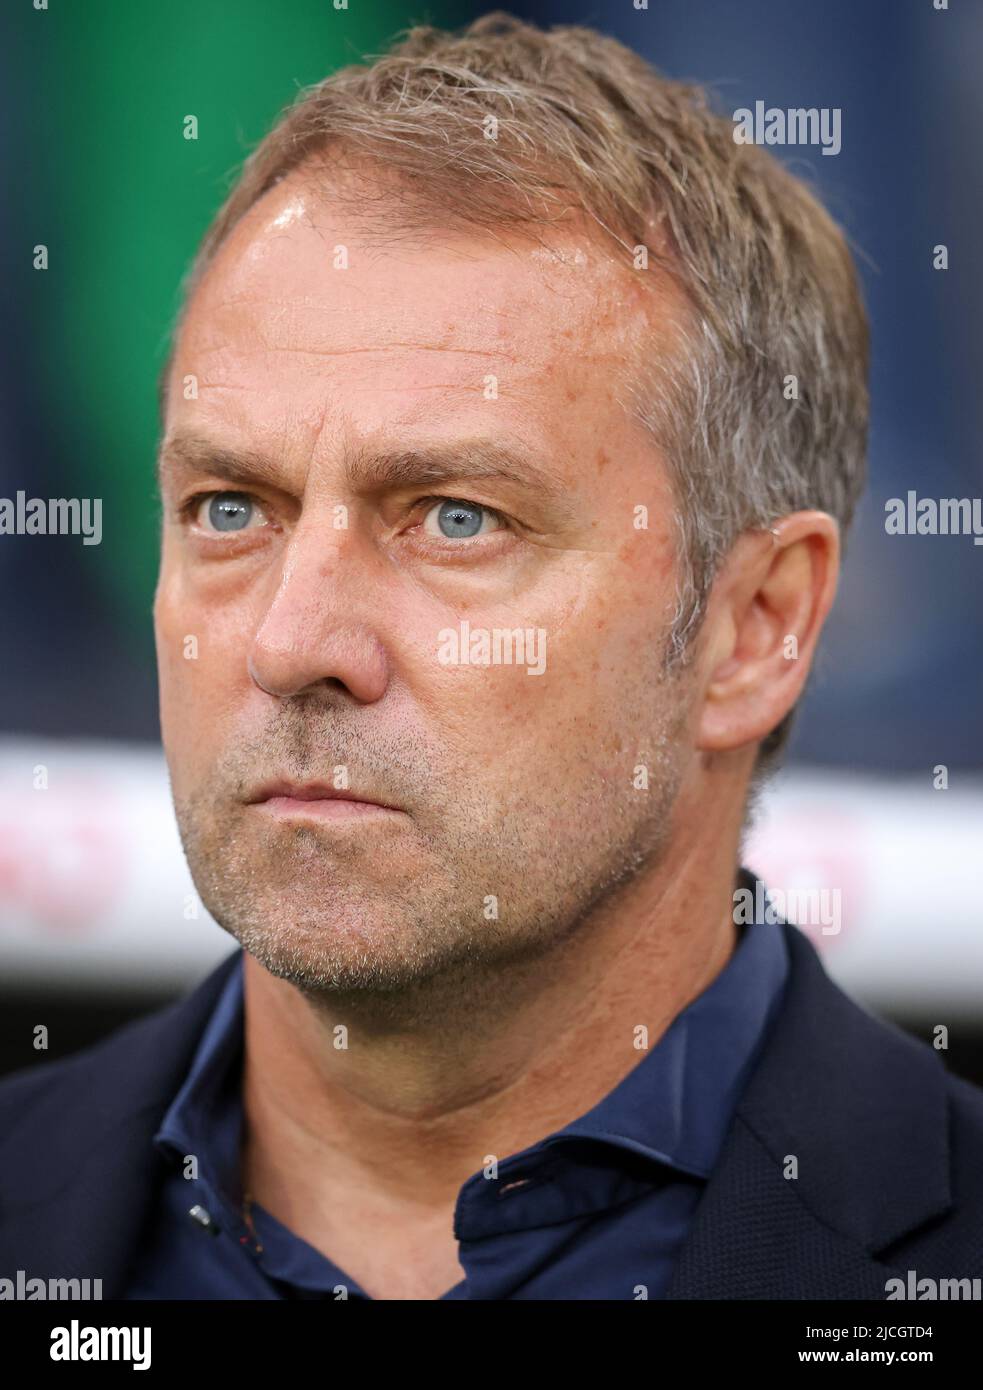 Head coach Hansi Flick  of germany  MUNICH, GERMANY - JUNE 07:  UEFA Nations League League A Group 3 match between Germany and England at Allianz Arena on June 07, 2022 in Munich, Germany. Nations League Deutschland England  © diebilderwelt / Alamy Stock Stock Photo